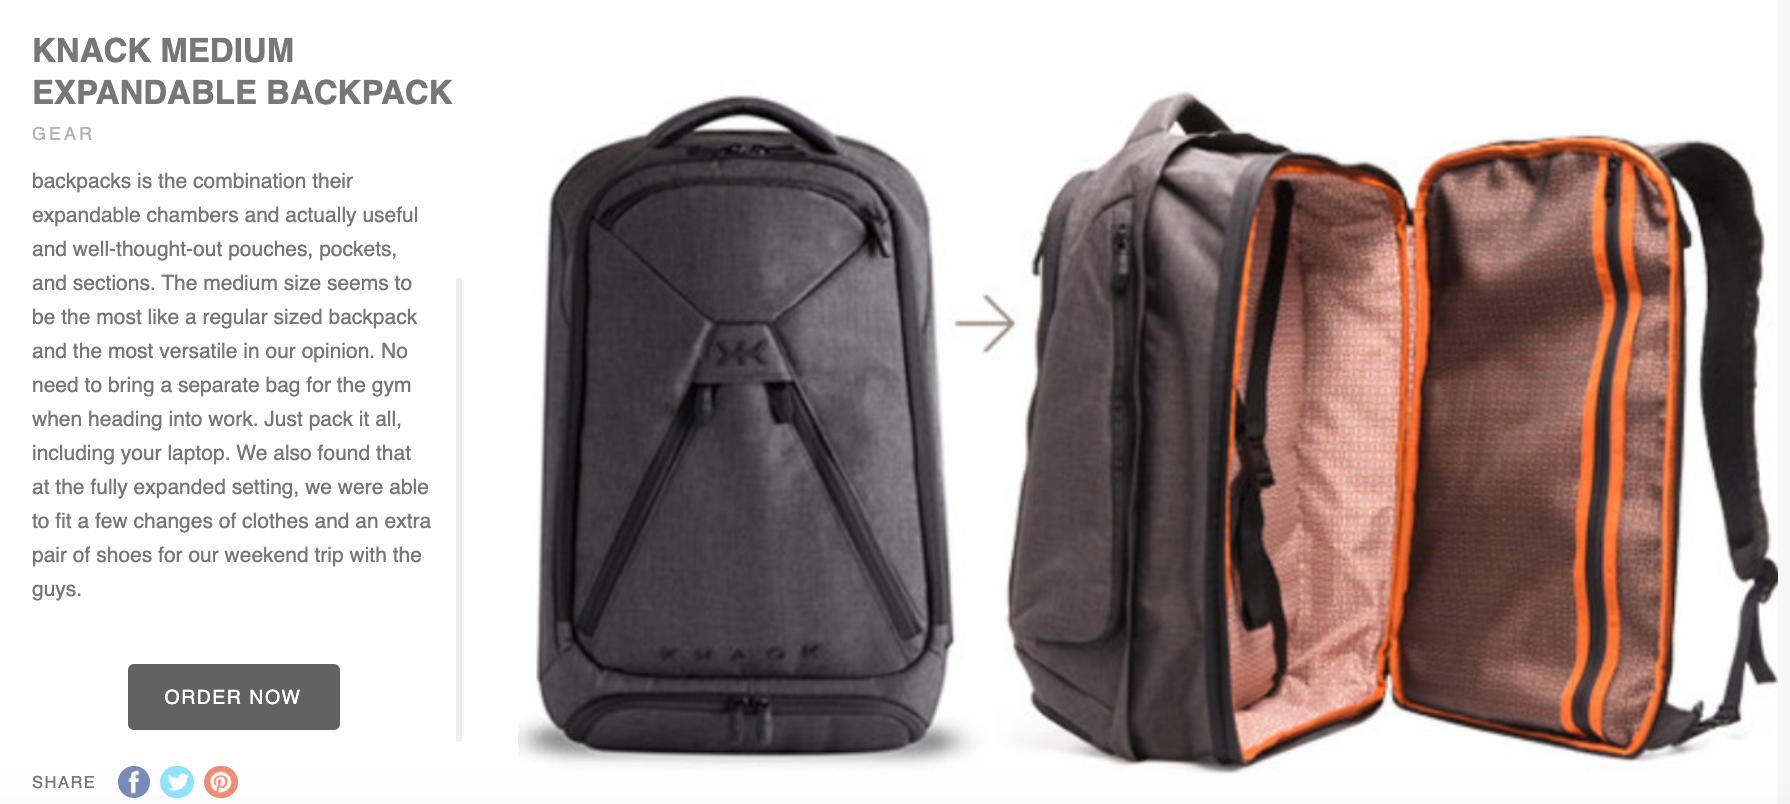 Review of Mens Professional Laptop Backpack - one bag life